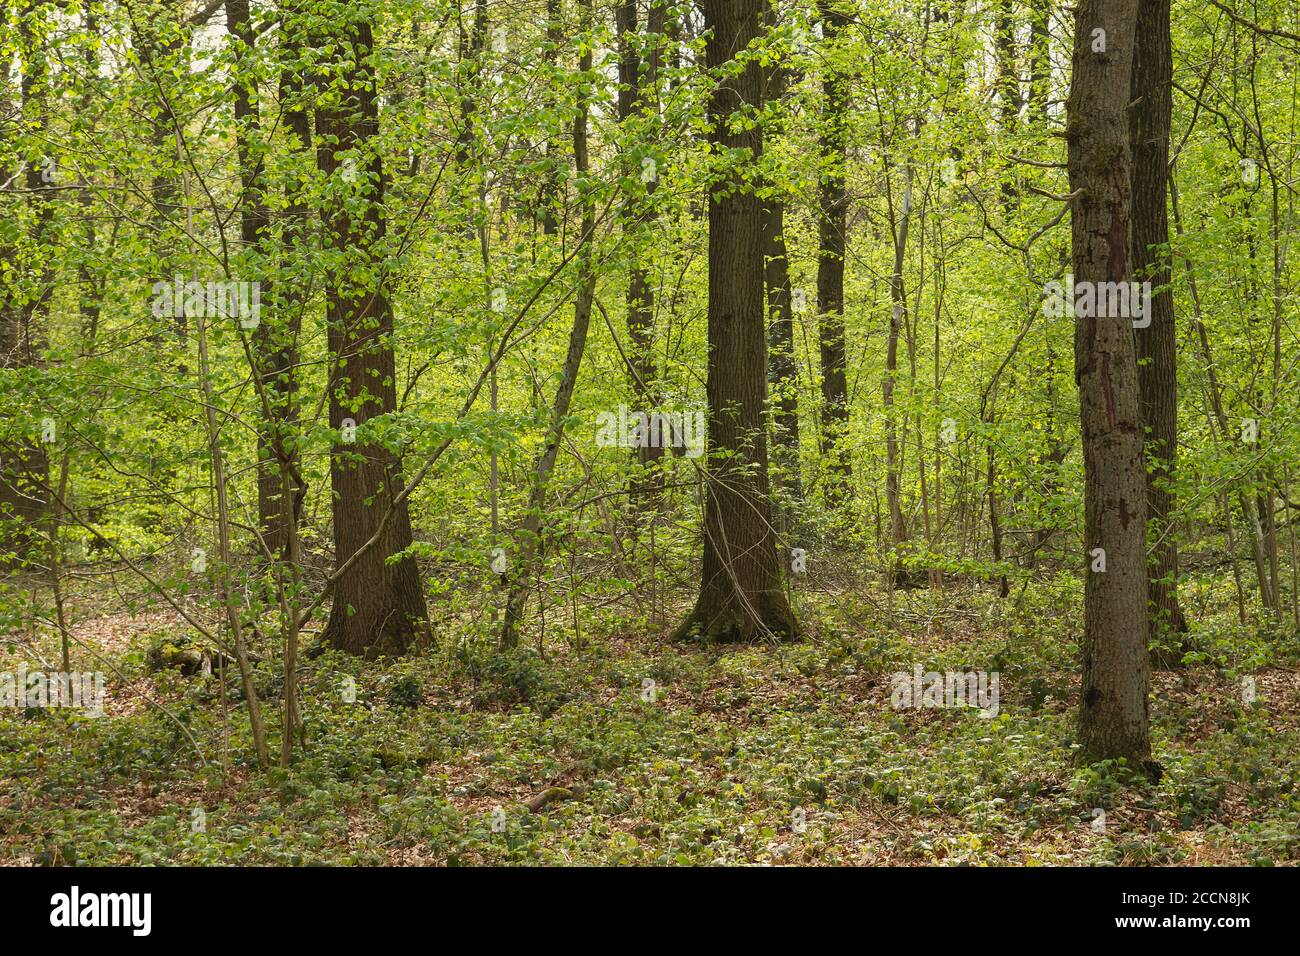 Green forest landscape in spring Stock Photo